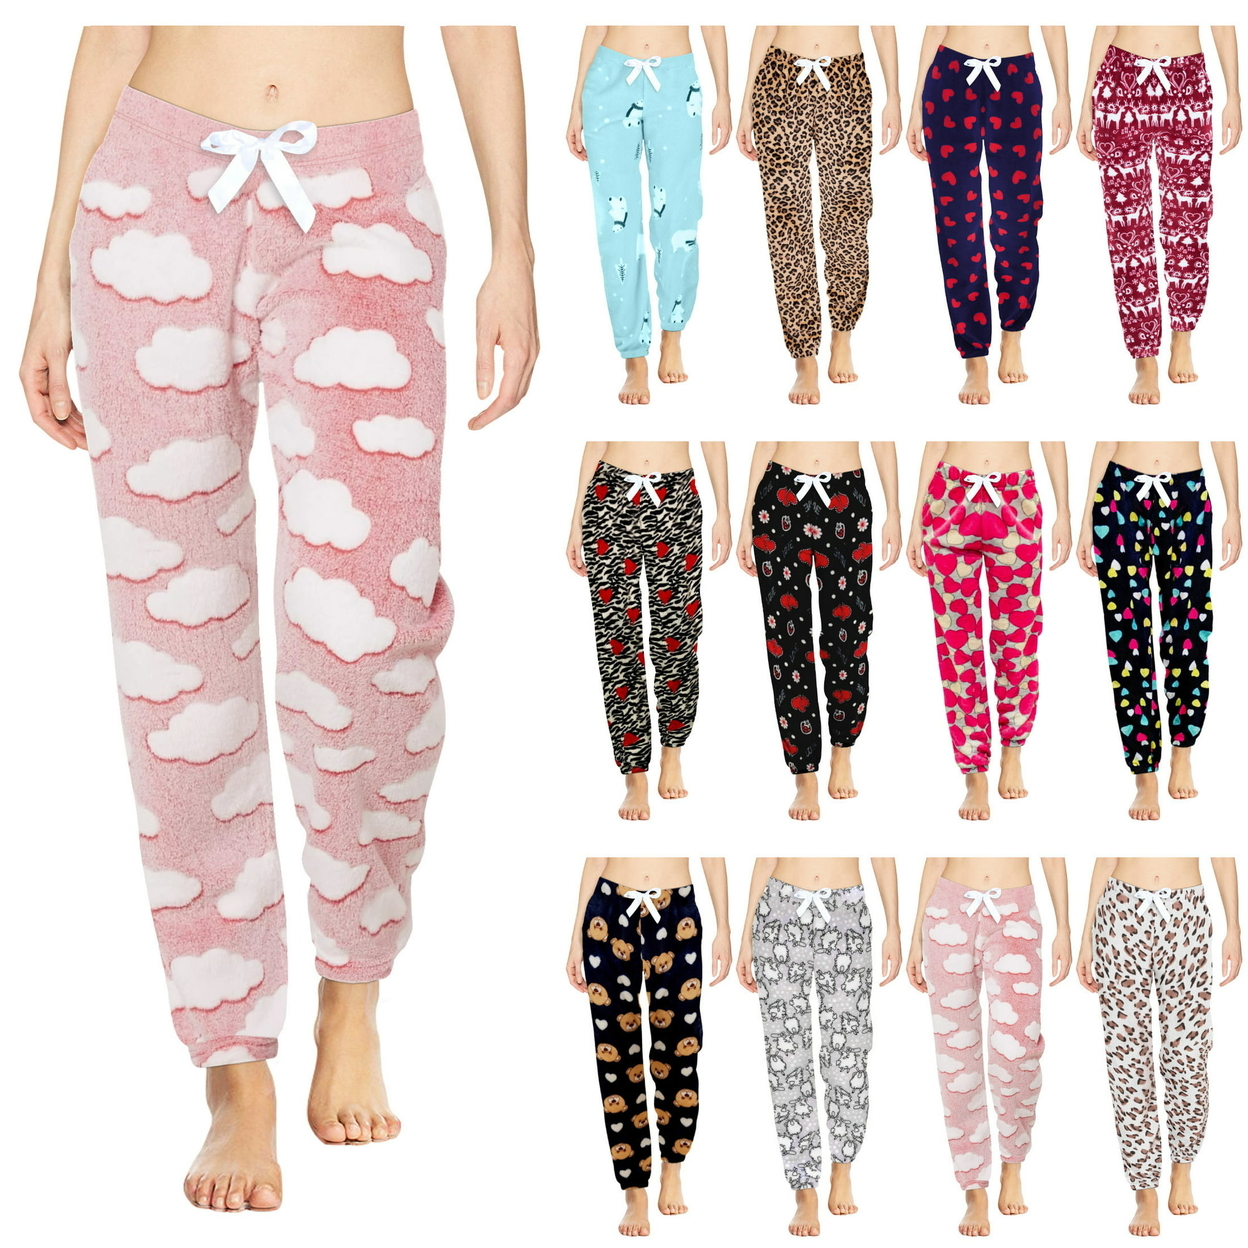 3-Pack: Women's Solid & Printed Ultra-Soft Comfy Stretch Micro-Fleece Pajama Lounge Pants - Large, Solid